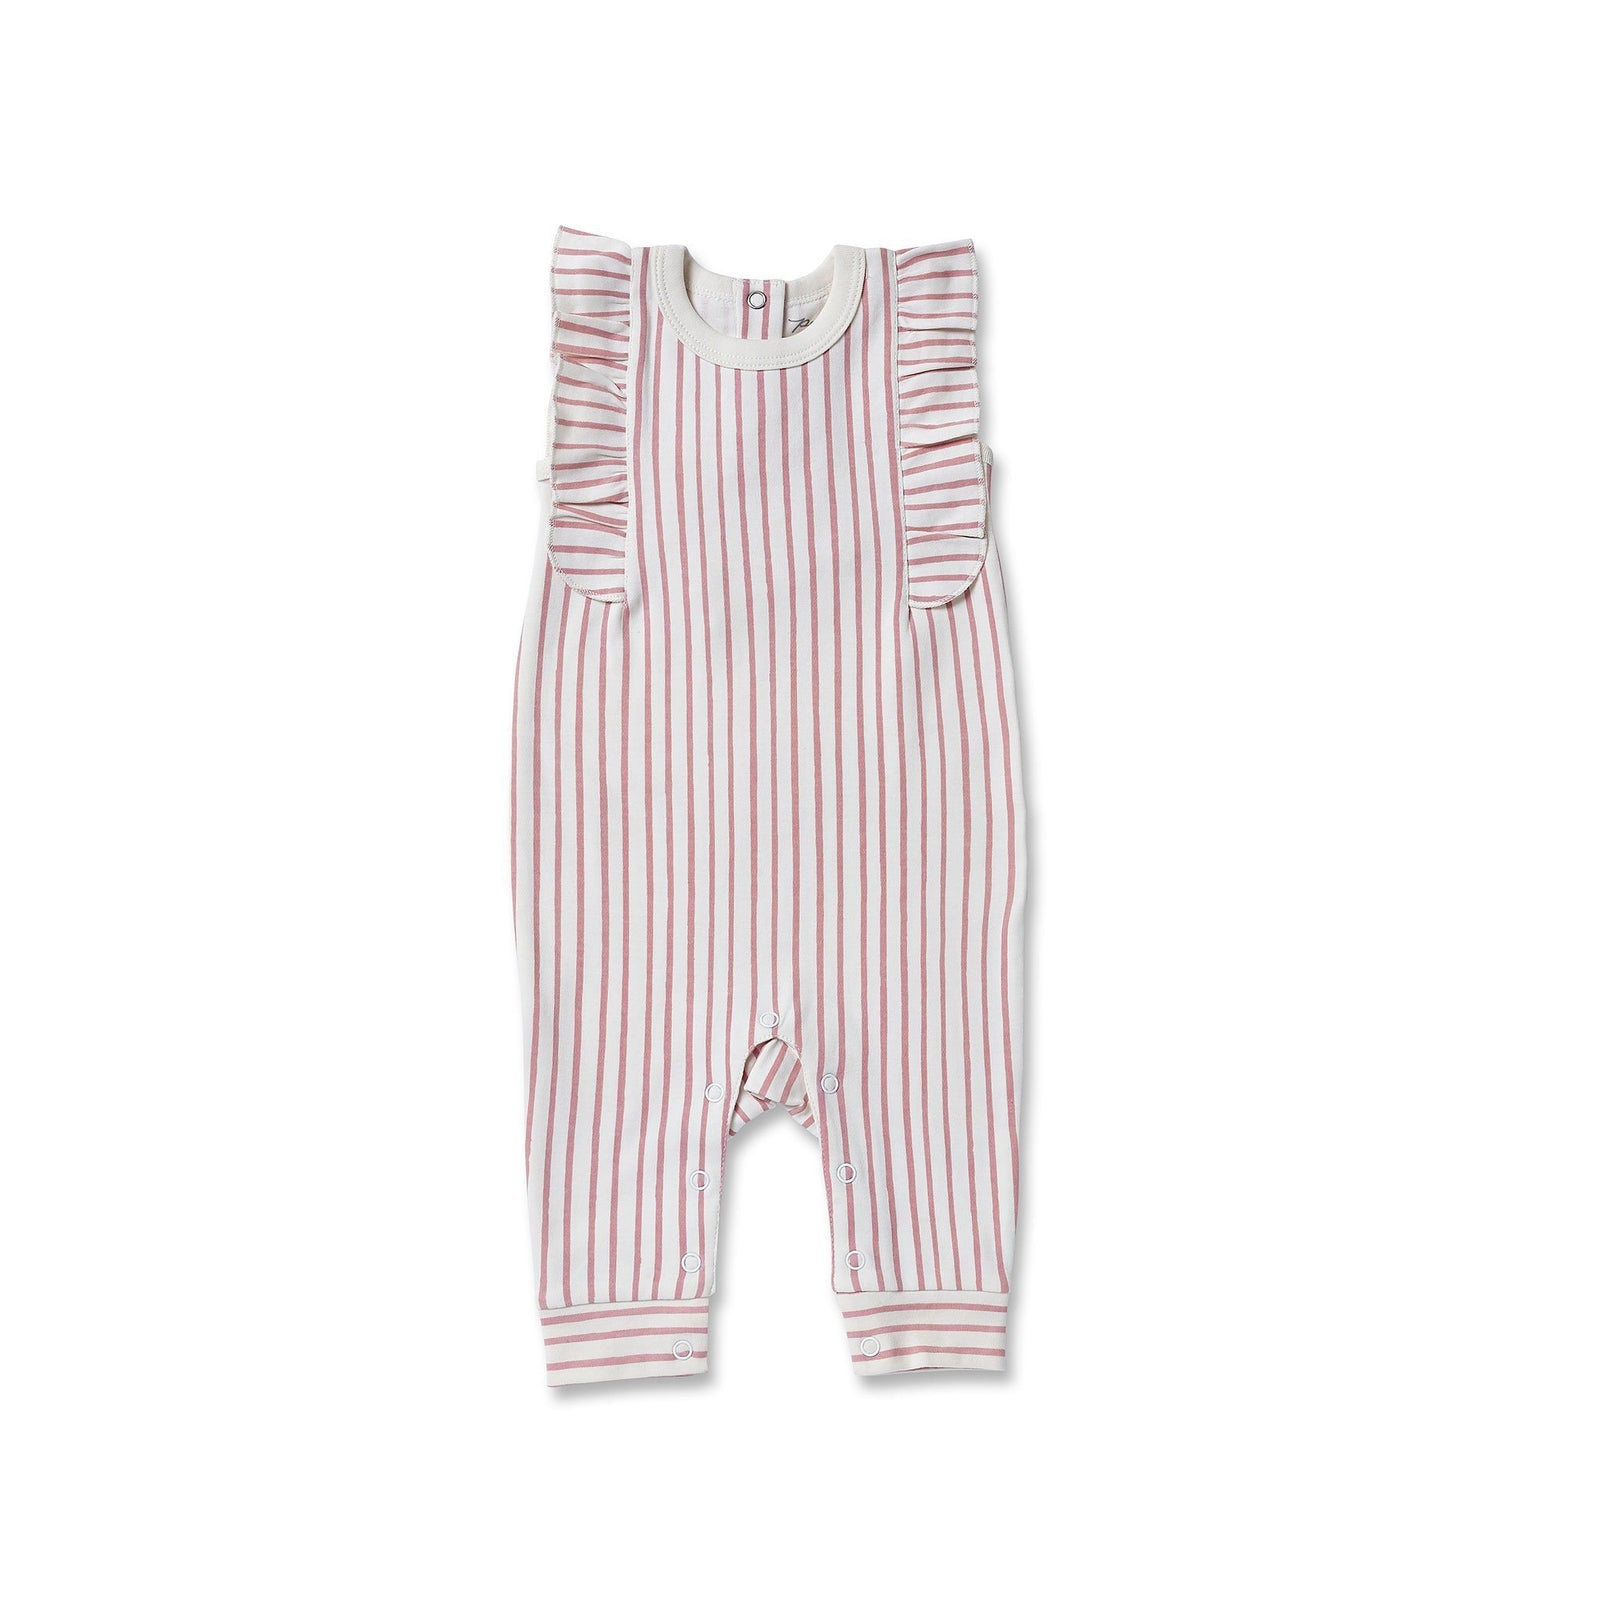 Pehr Short Sleeve Stripes Away Dark Pink w/Ruffle Romper. Certified organic cotton. White with pink stripes and ruffles on the collar.